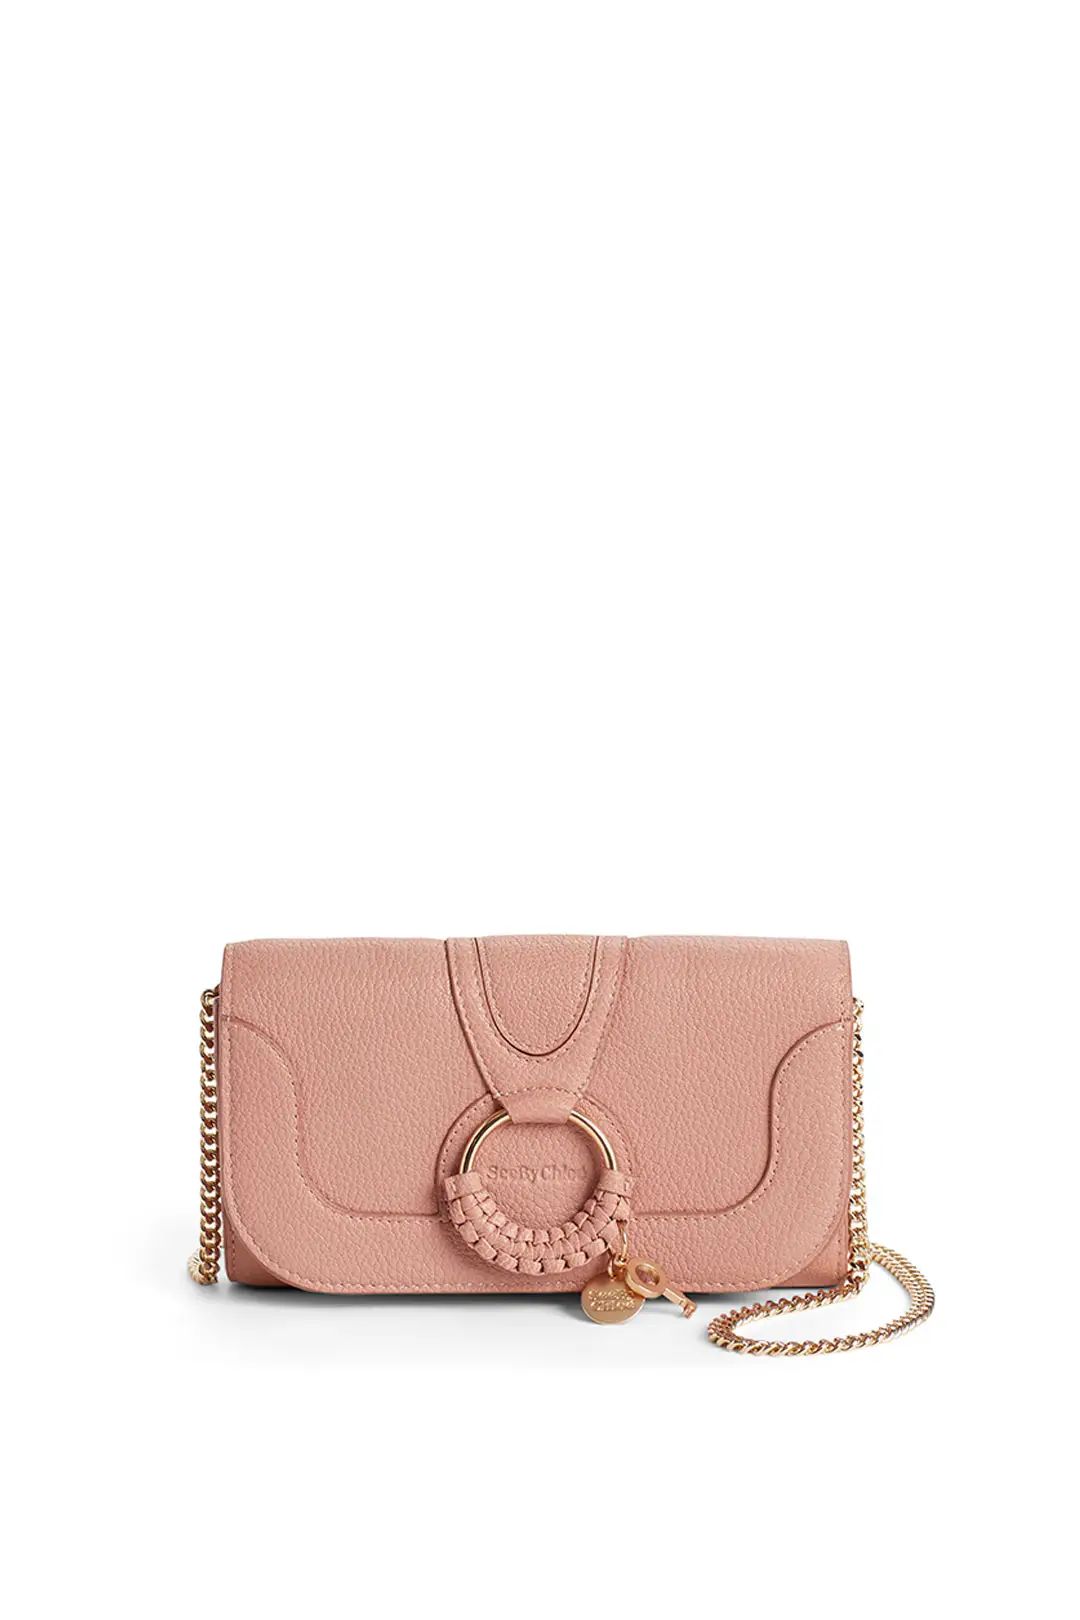 See by Chloe Accessories Pink Small Crossbody | Rent the Runway